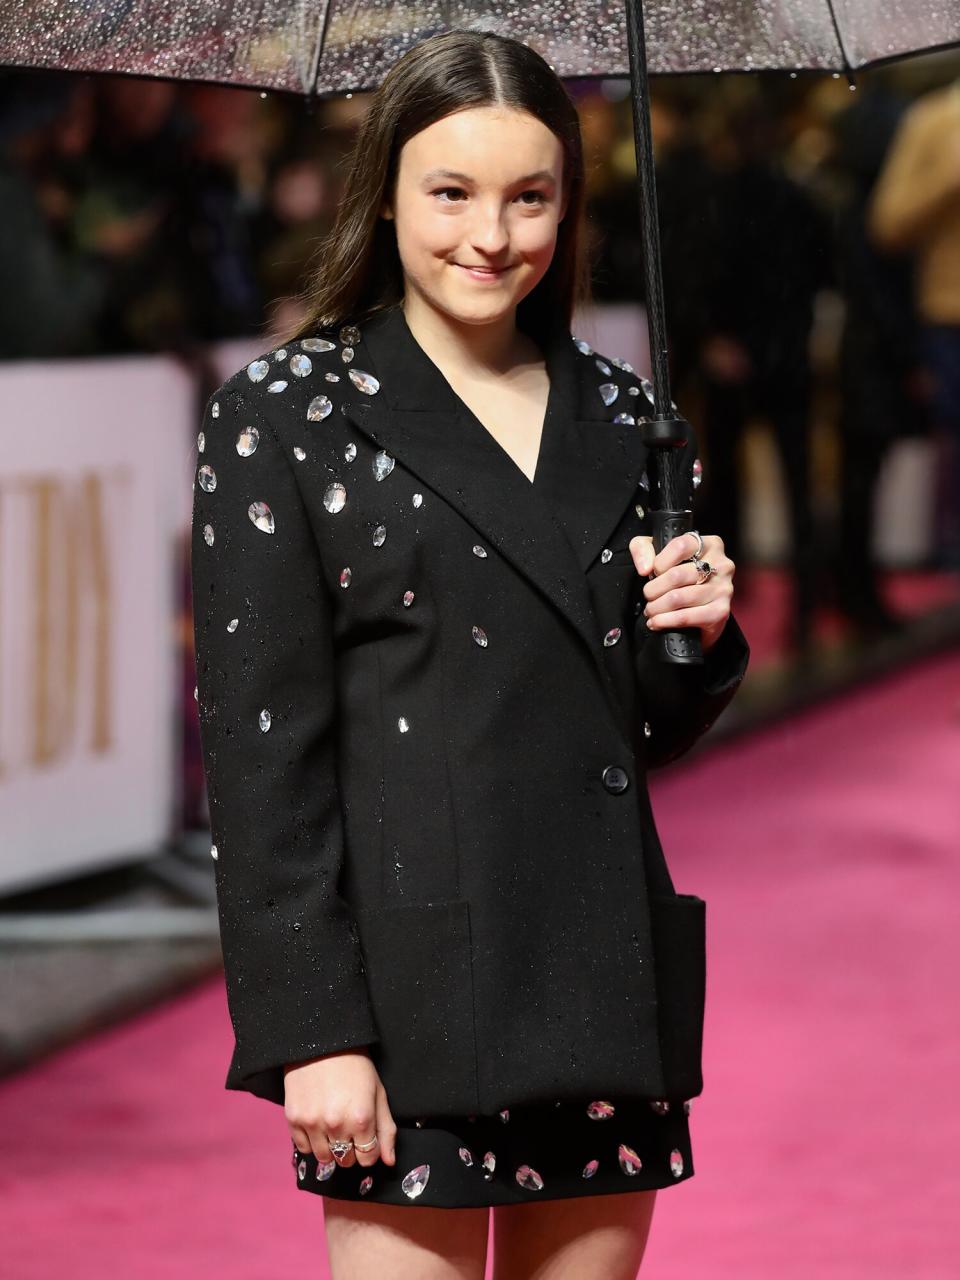 Bella Ramsey attends the "Judy" European Premiere at The Curzon Mayfair on September 30, 2019 in London, England